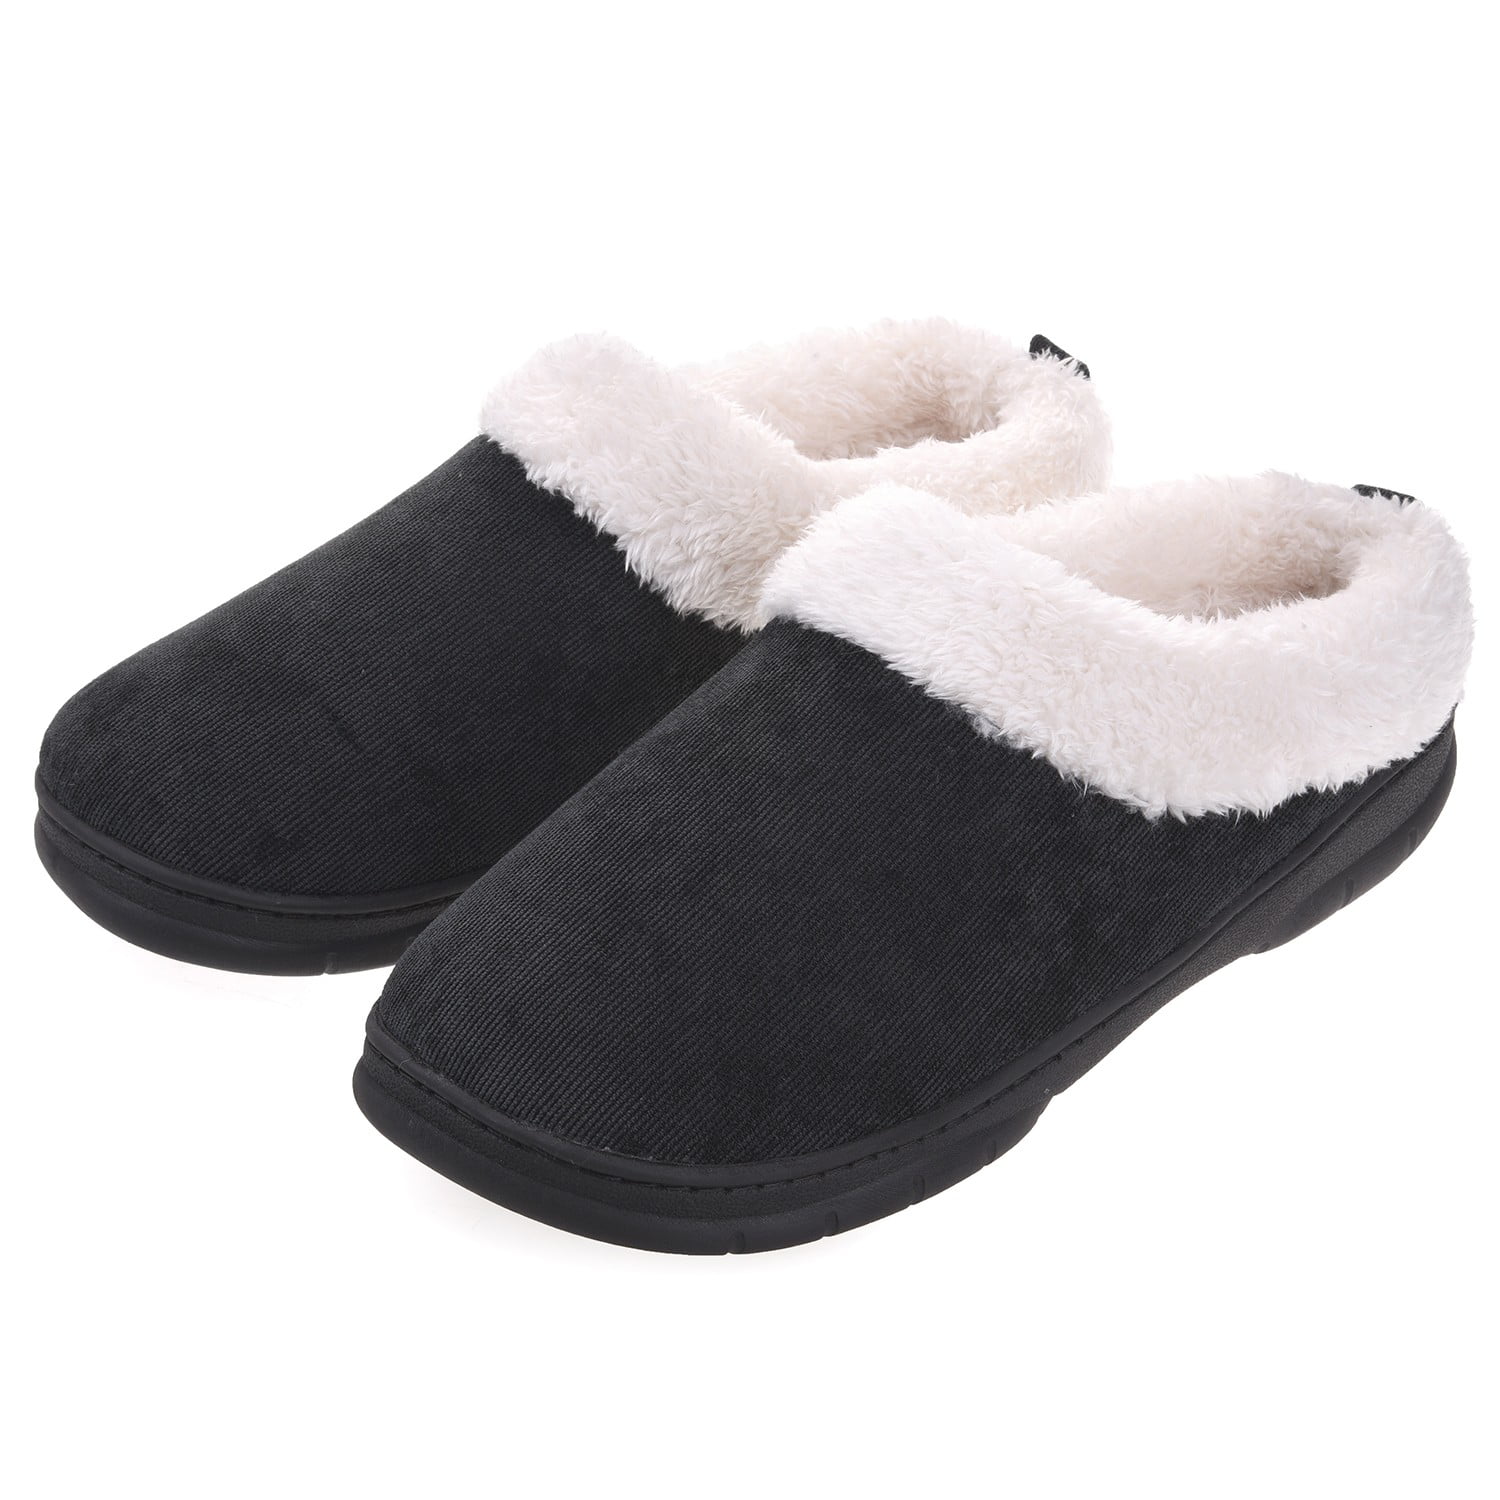 Vonmay - Men's Slippers House Shoes Fuzzy Fluffy Clog Slip On Memory ...